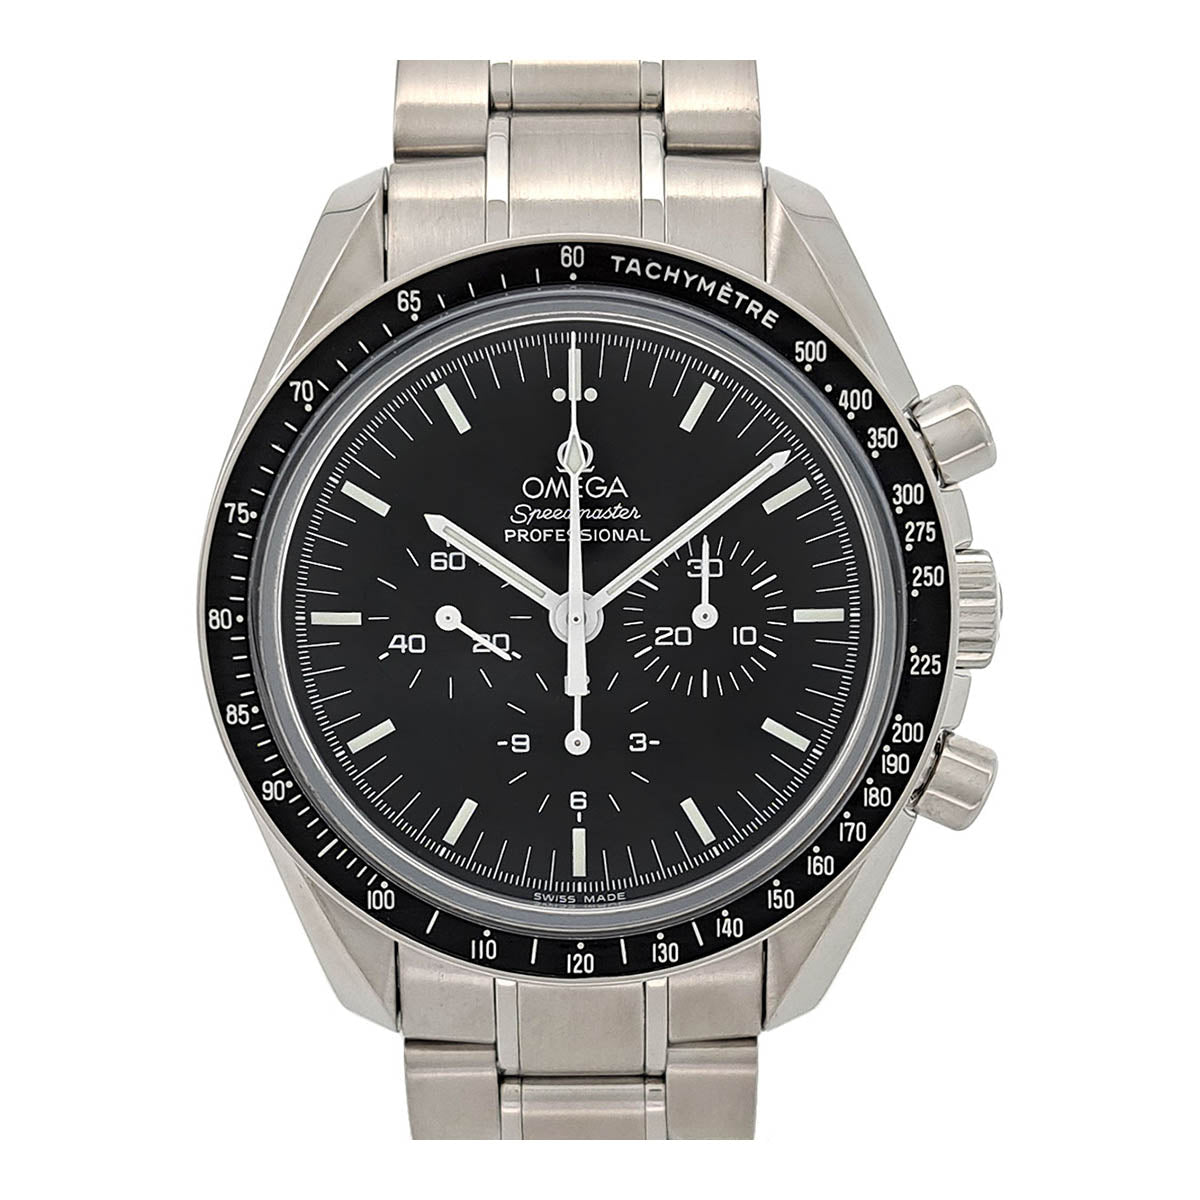 Omega Speedmaster Professional Chronograph Manual Winding Stainless Steel Men's Watch 3573.5